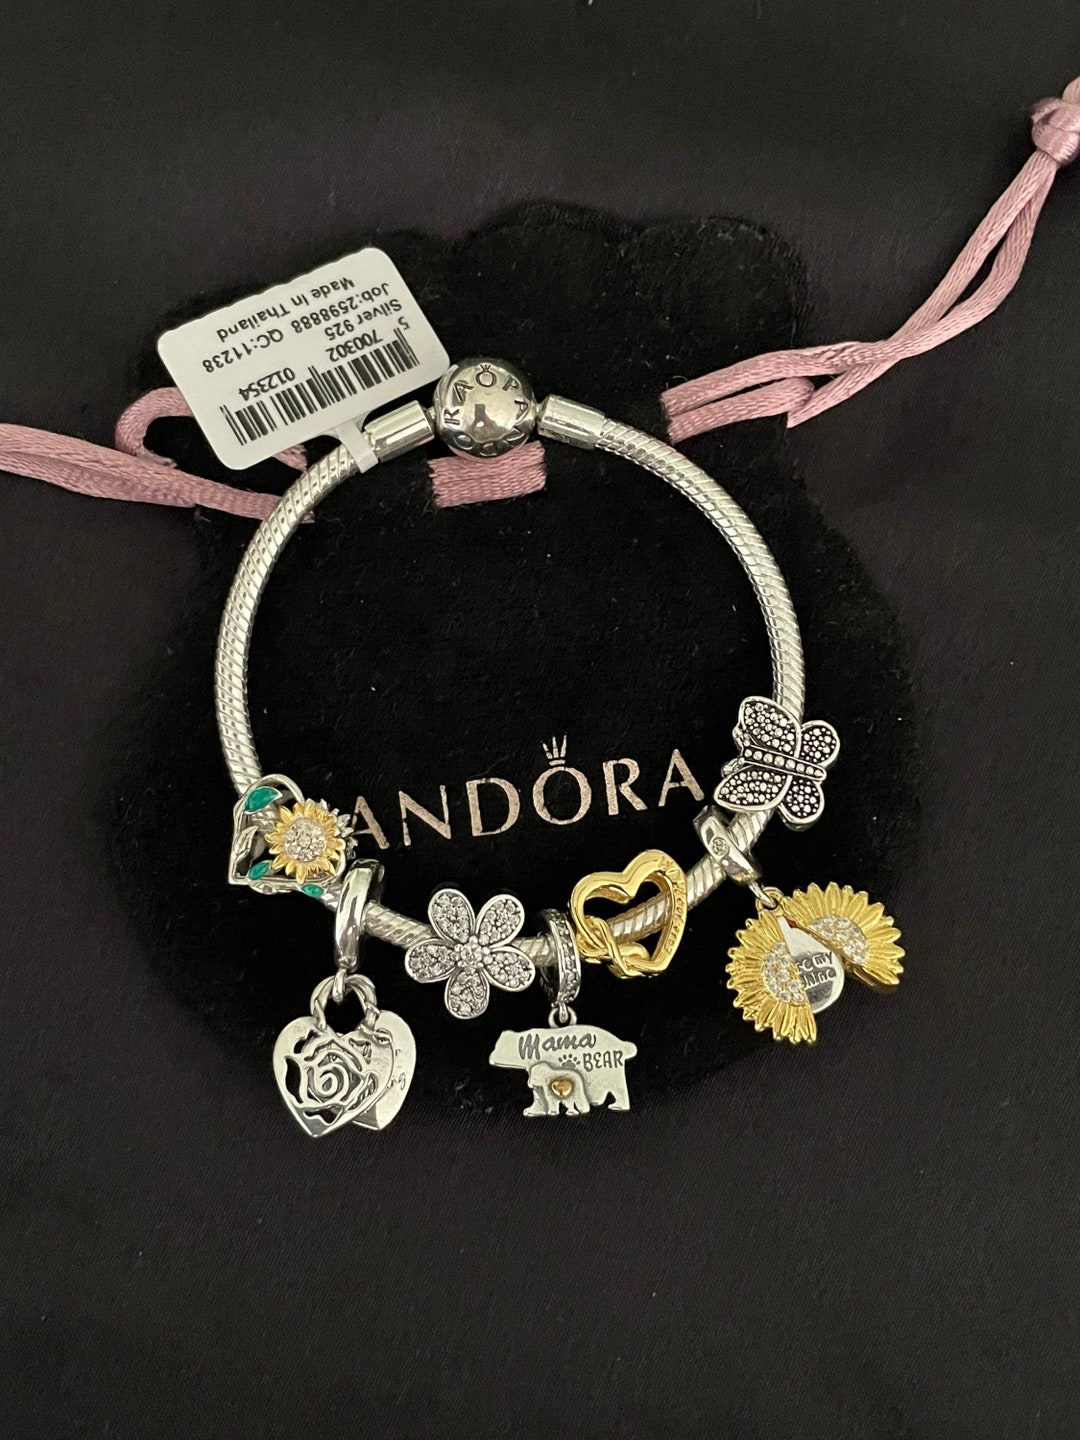 Pandora Bracelet with 5 charms and 2 spacers - Jewelry & Accessories -  Milledgeville, Georgia